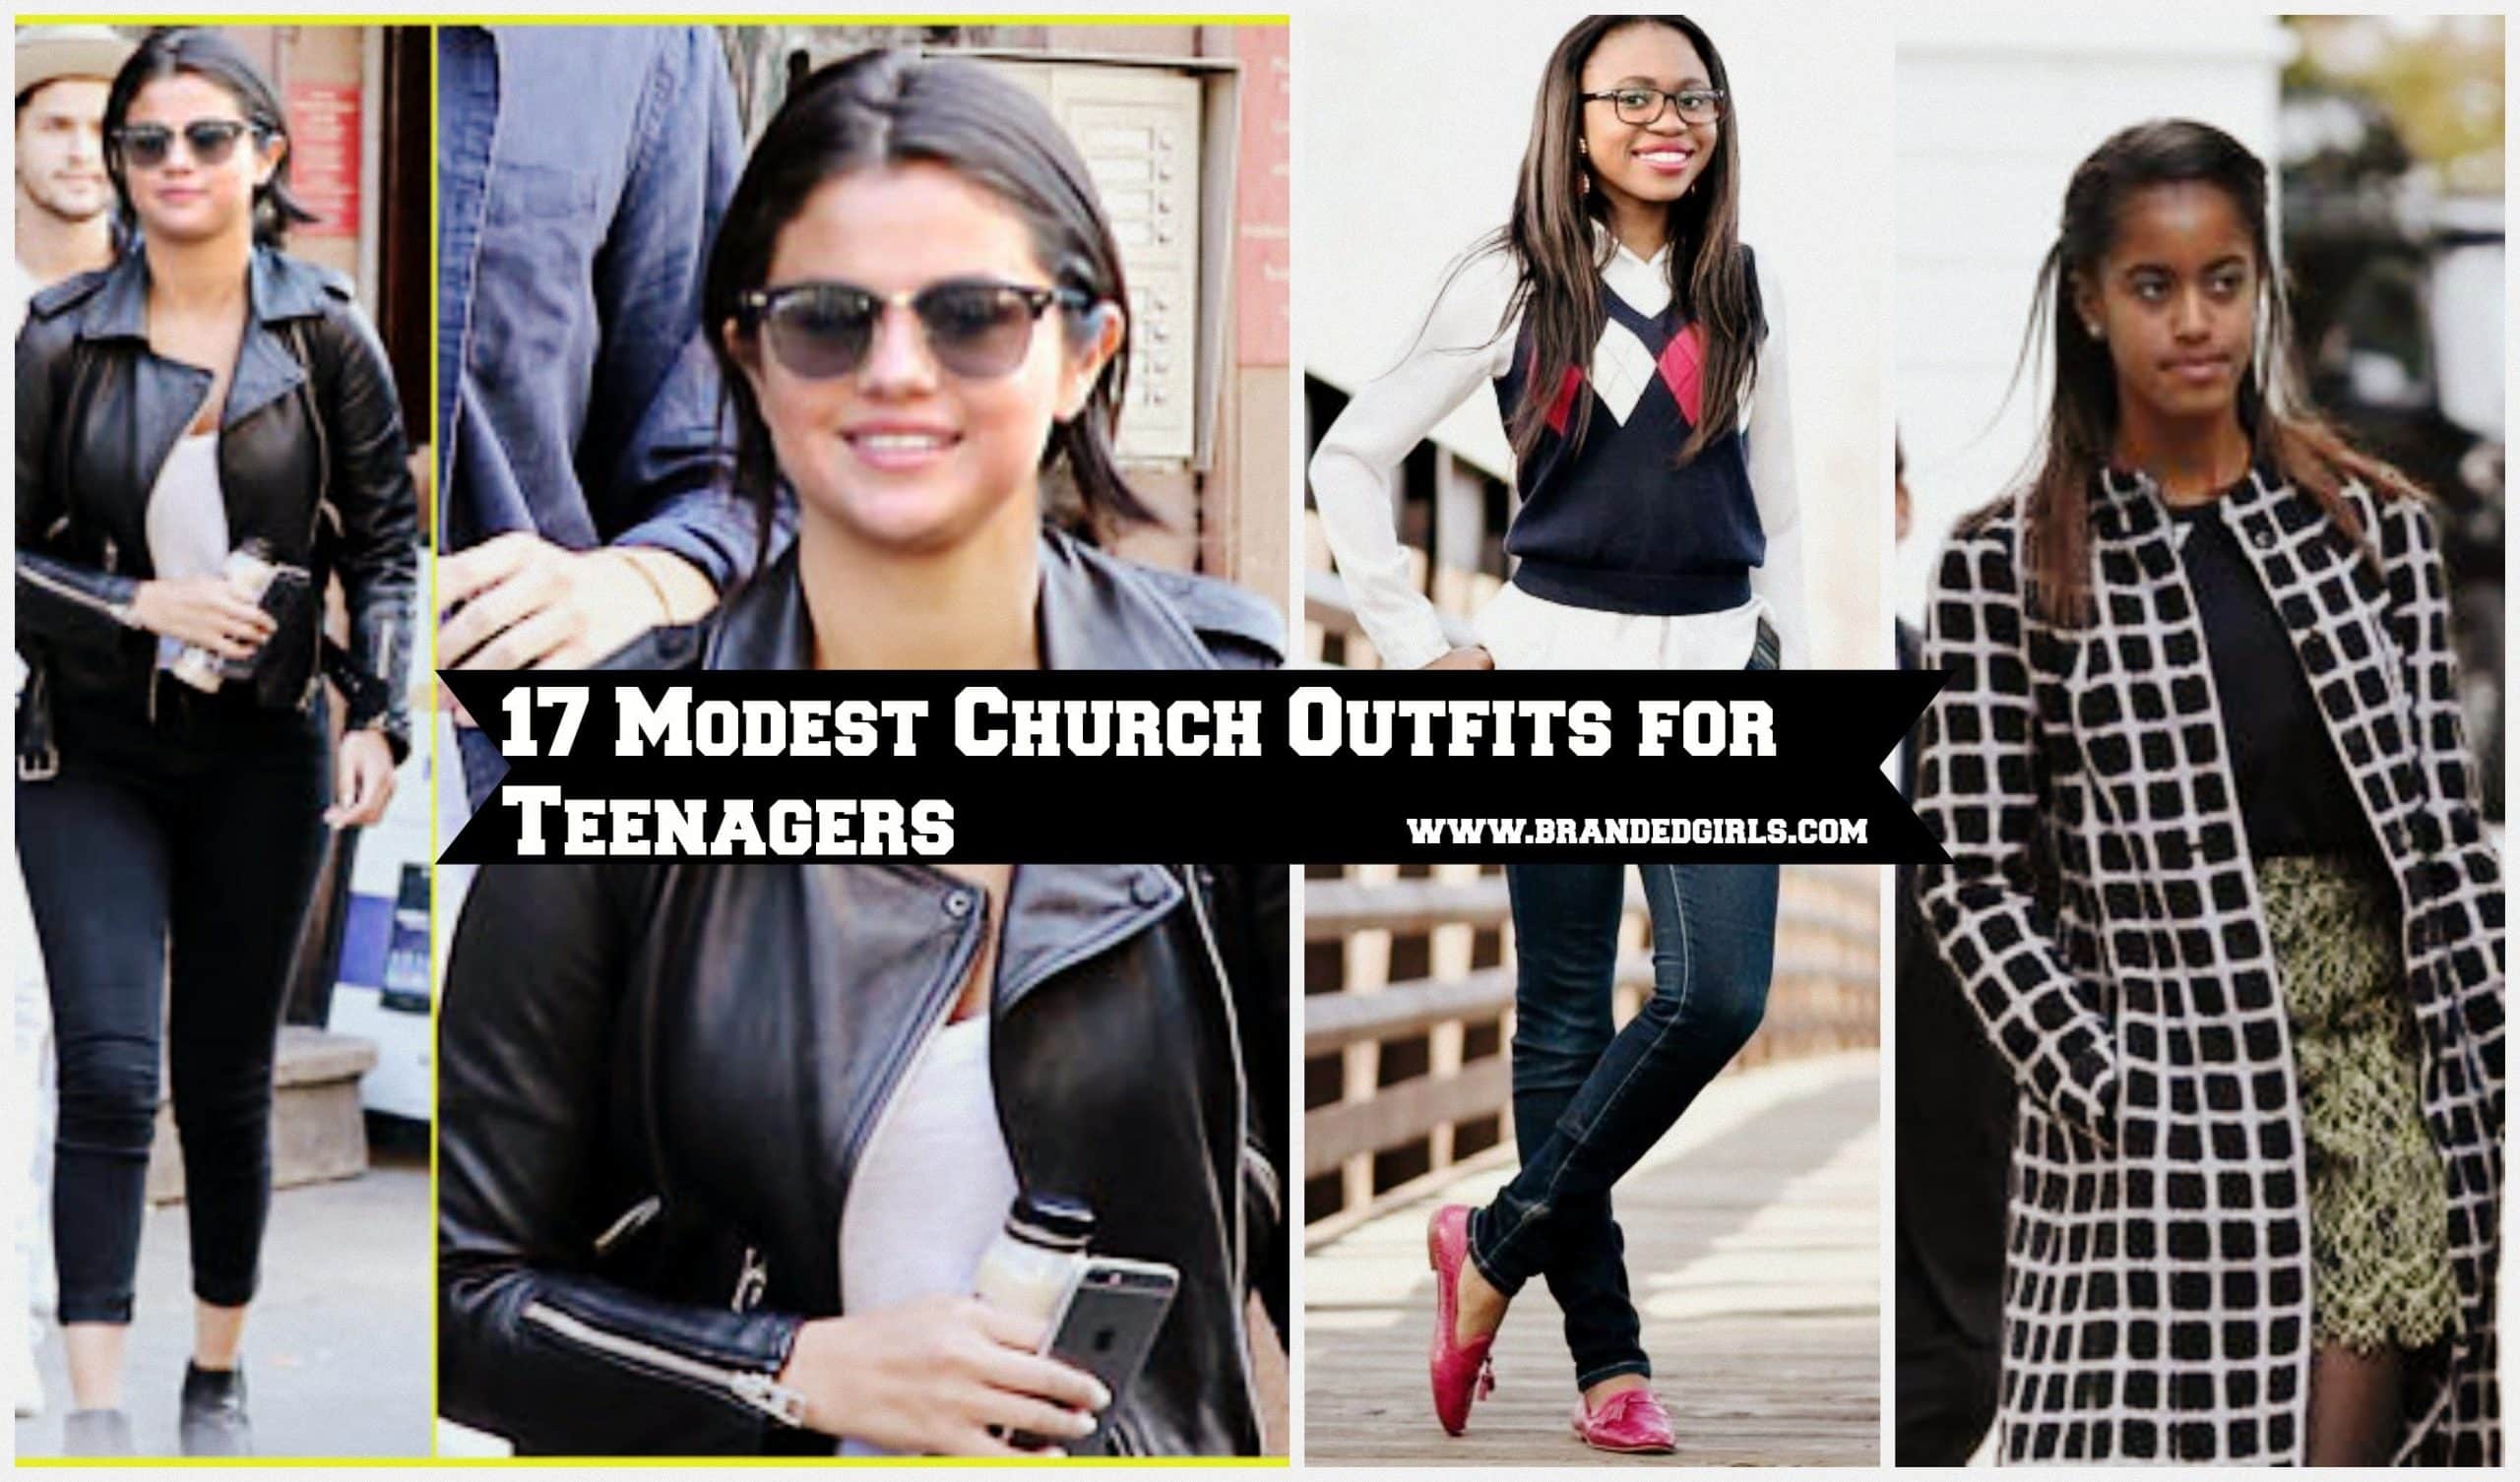 church outfits for teenagers